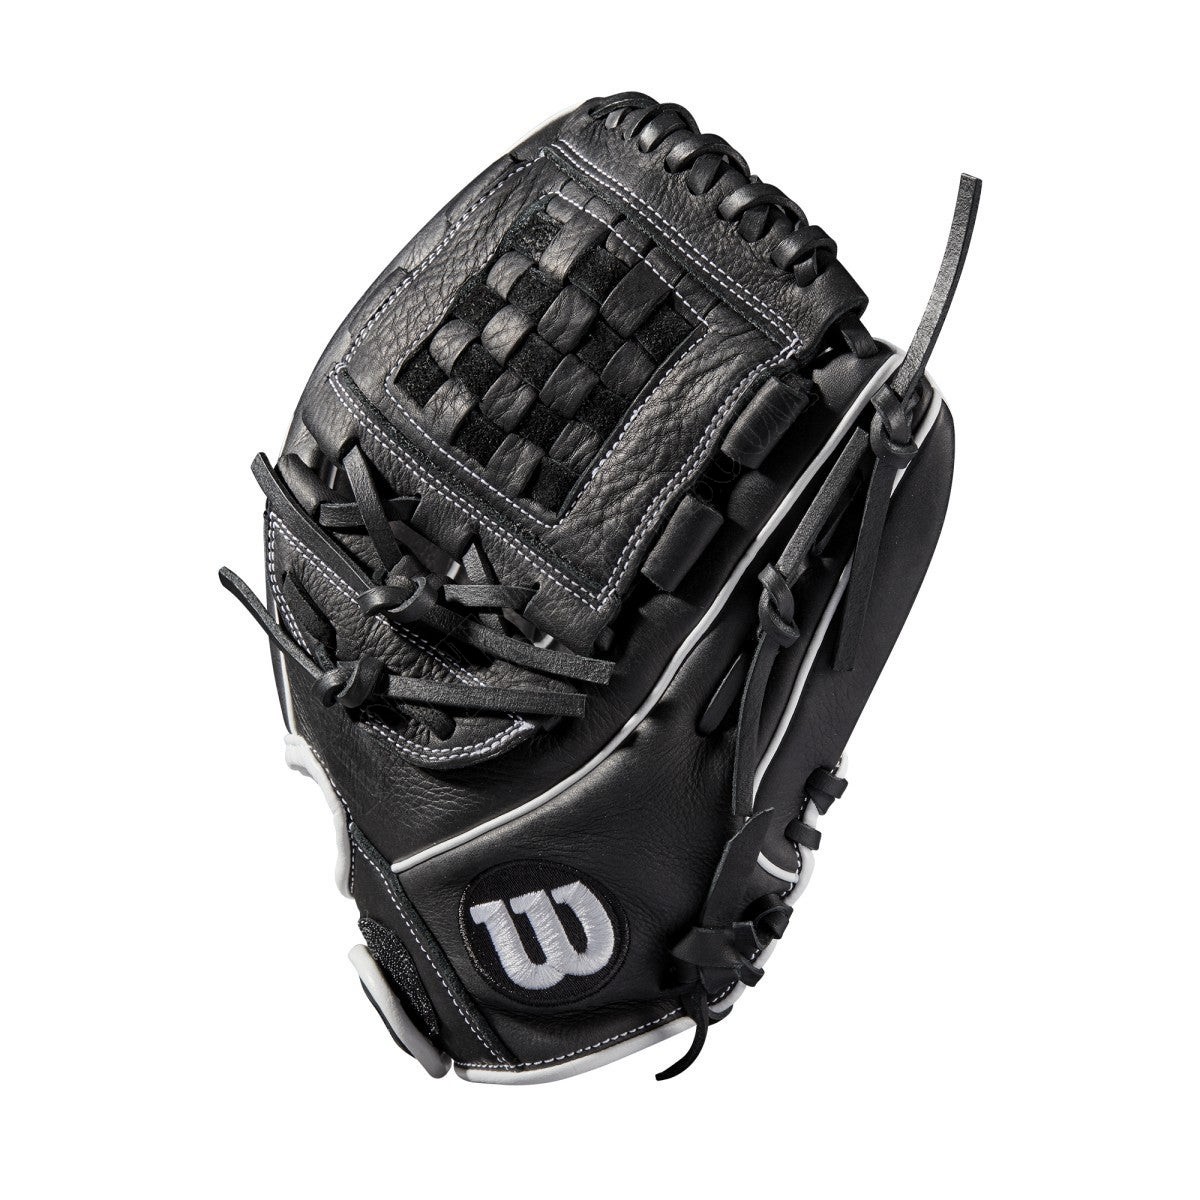 2019 A1000 12" Pitcher's Fastpitch Glove ● Wilson Promotions - -3